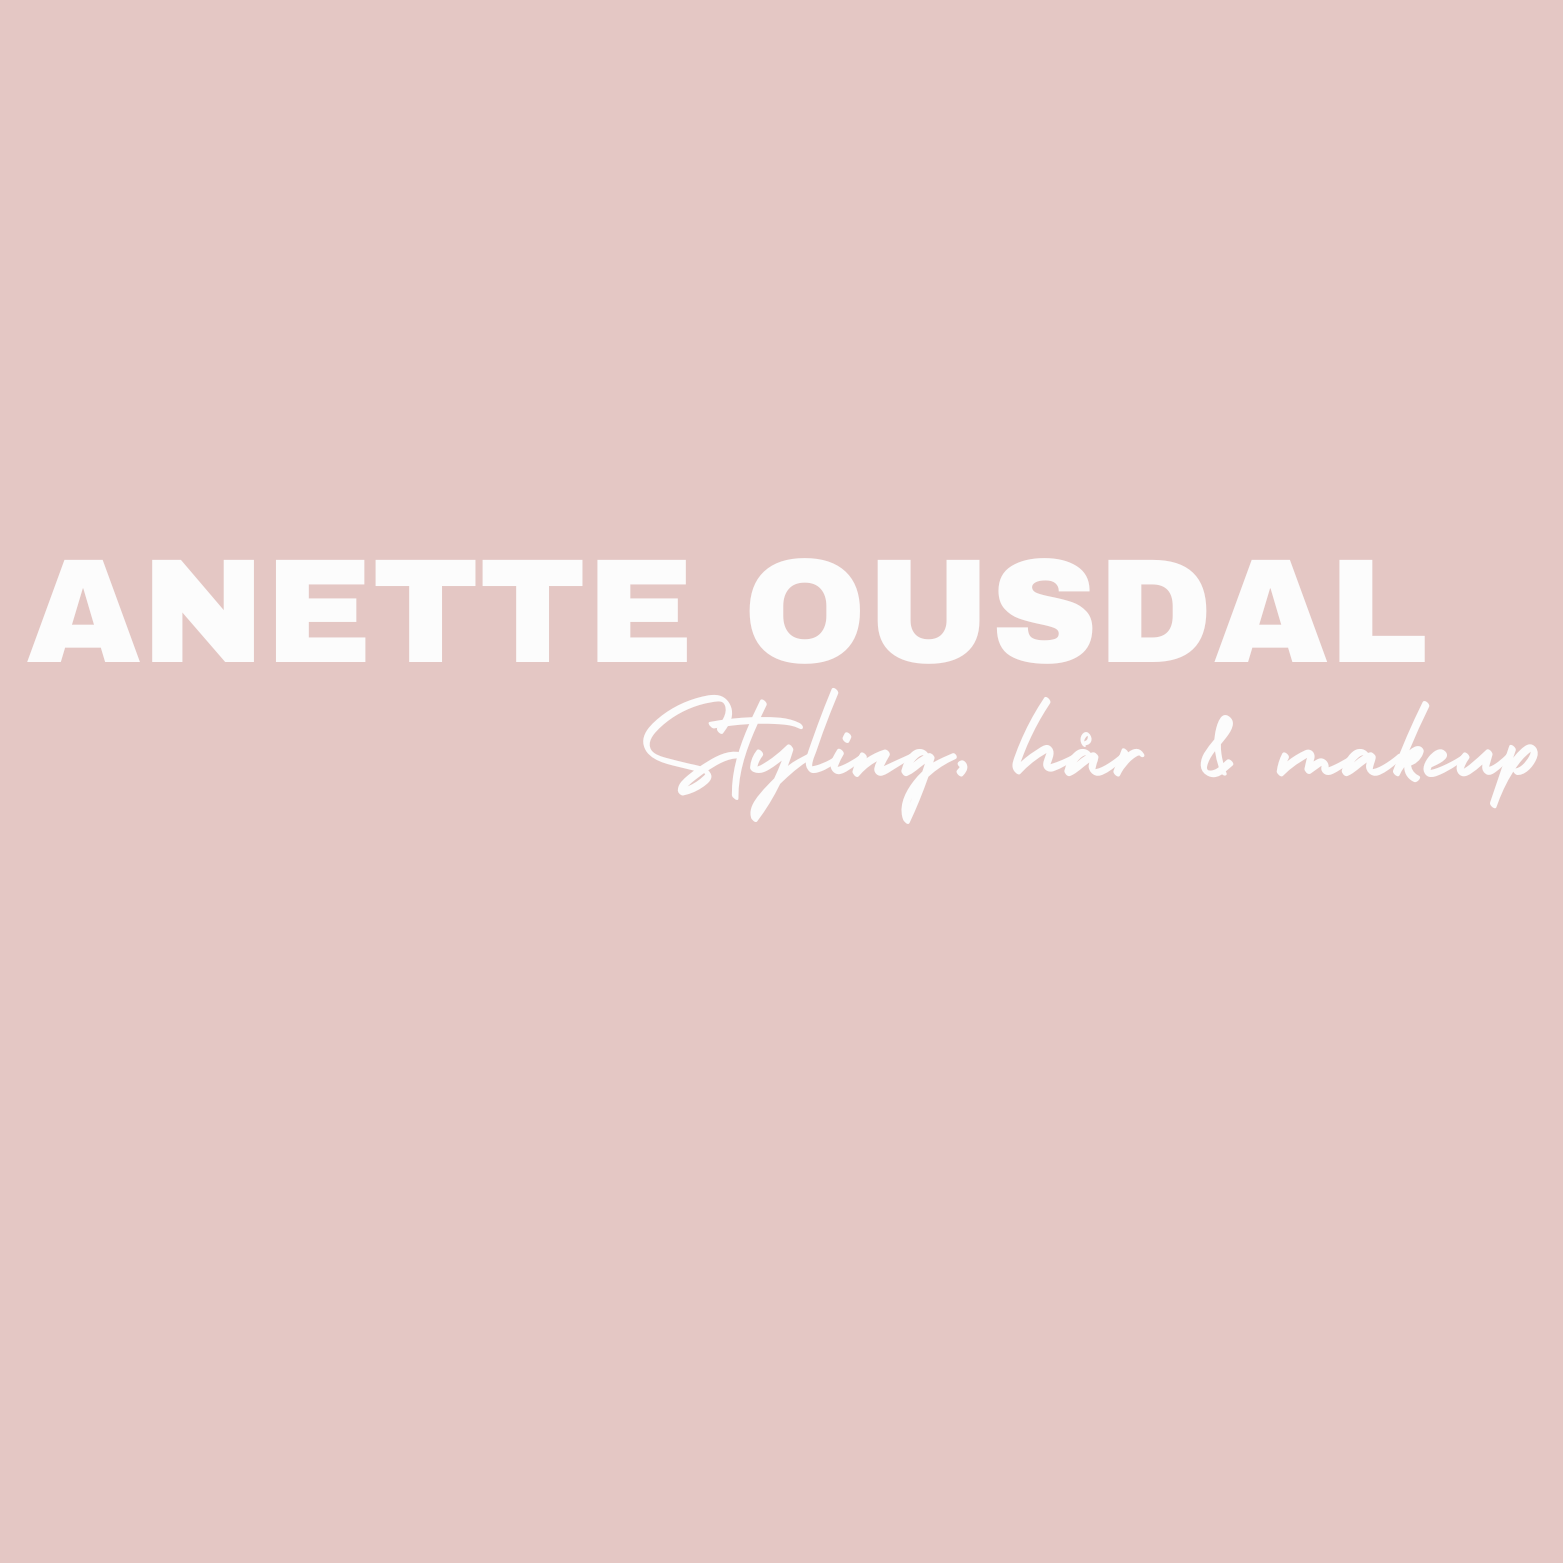 ANETTE OUSDAL